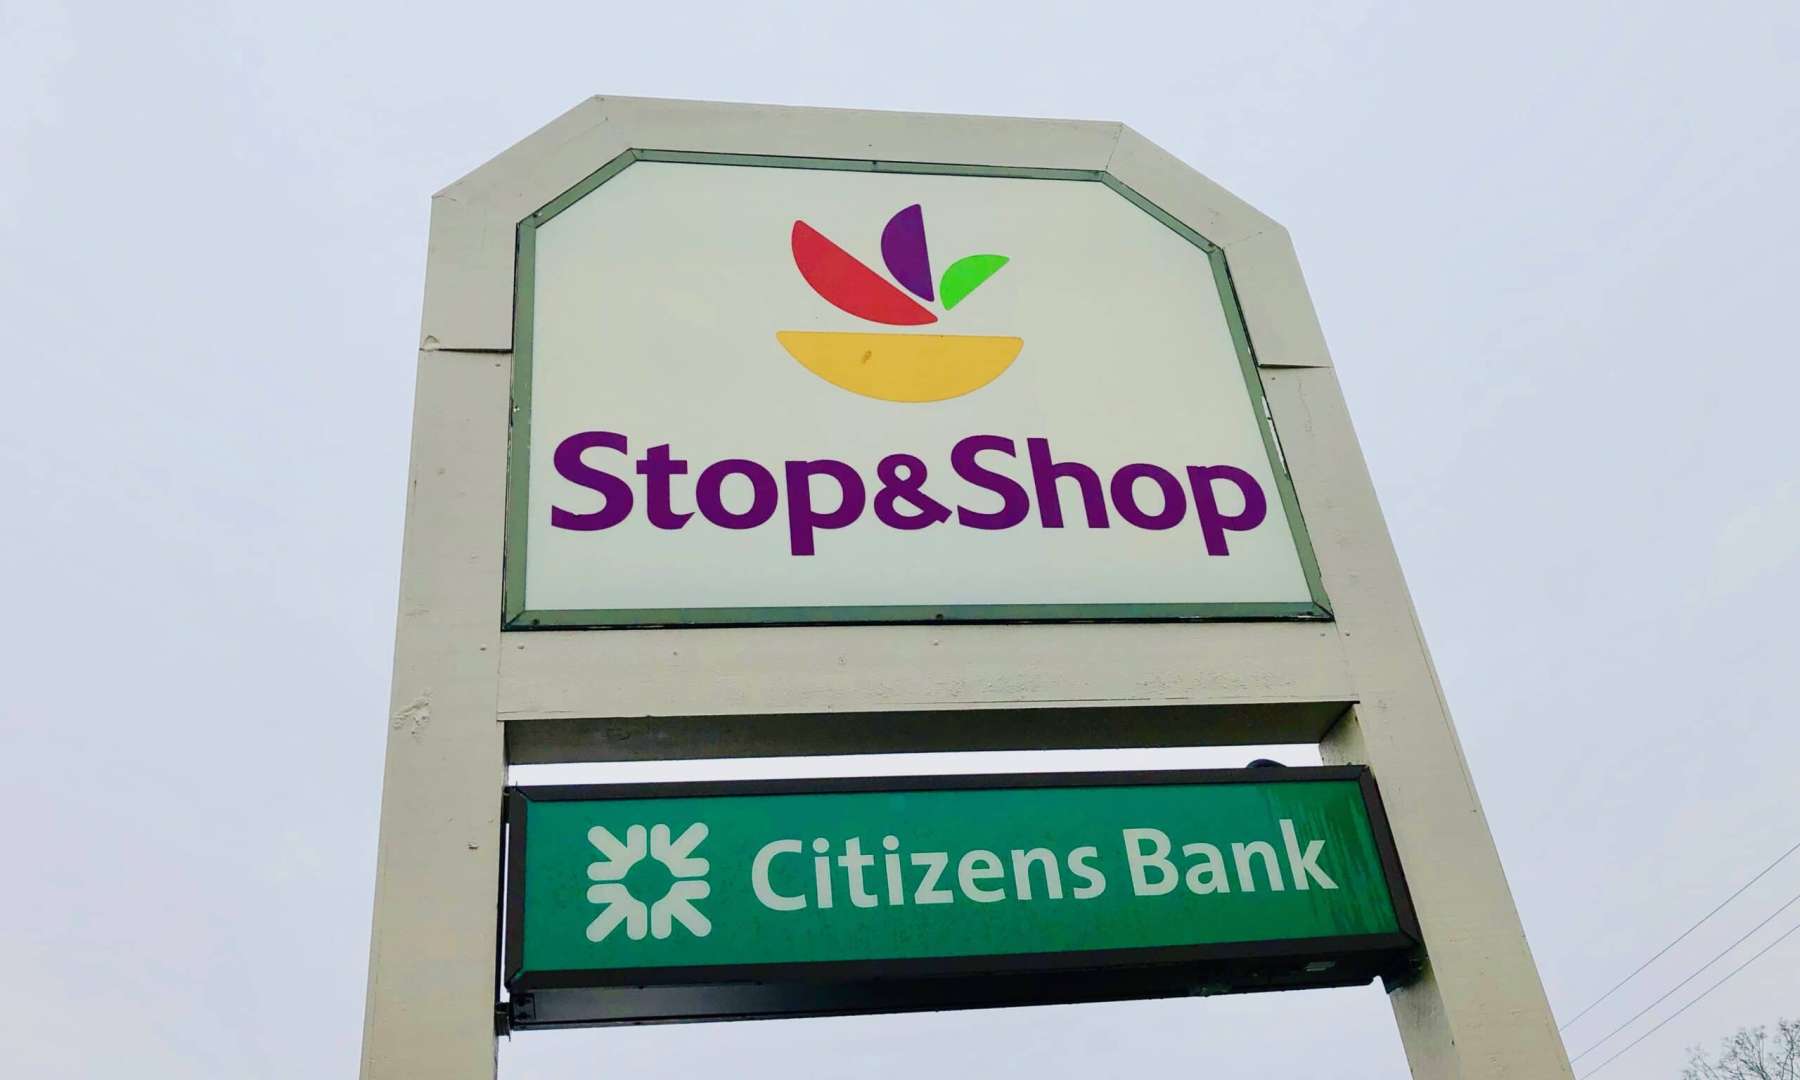 Rhode Island News: Union contract with Stop & Shop ends at midnight; talks continue, strike authorization votes called